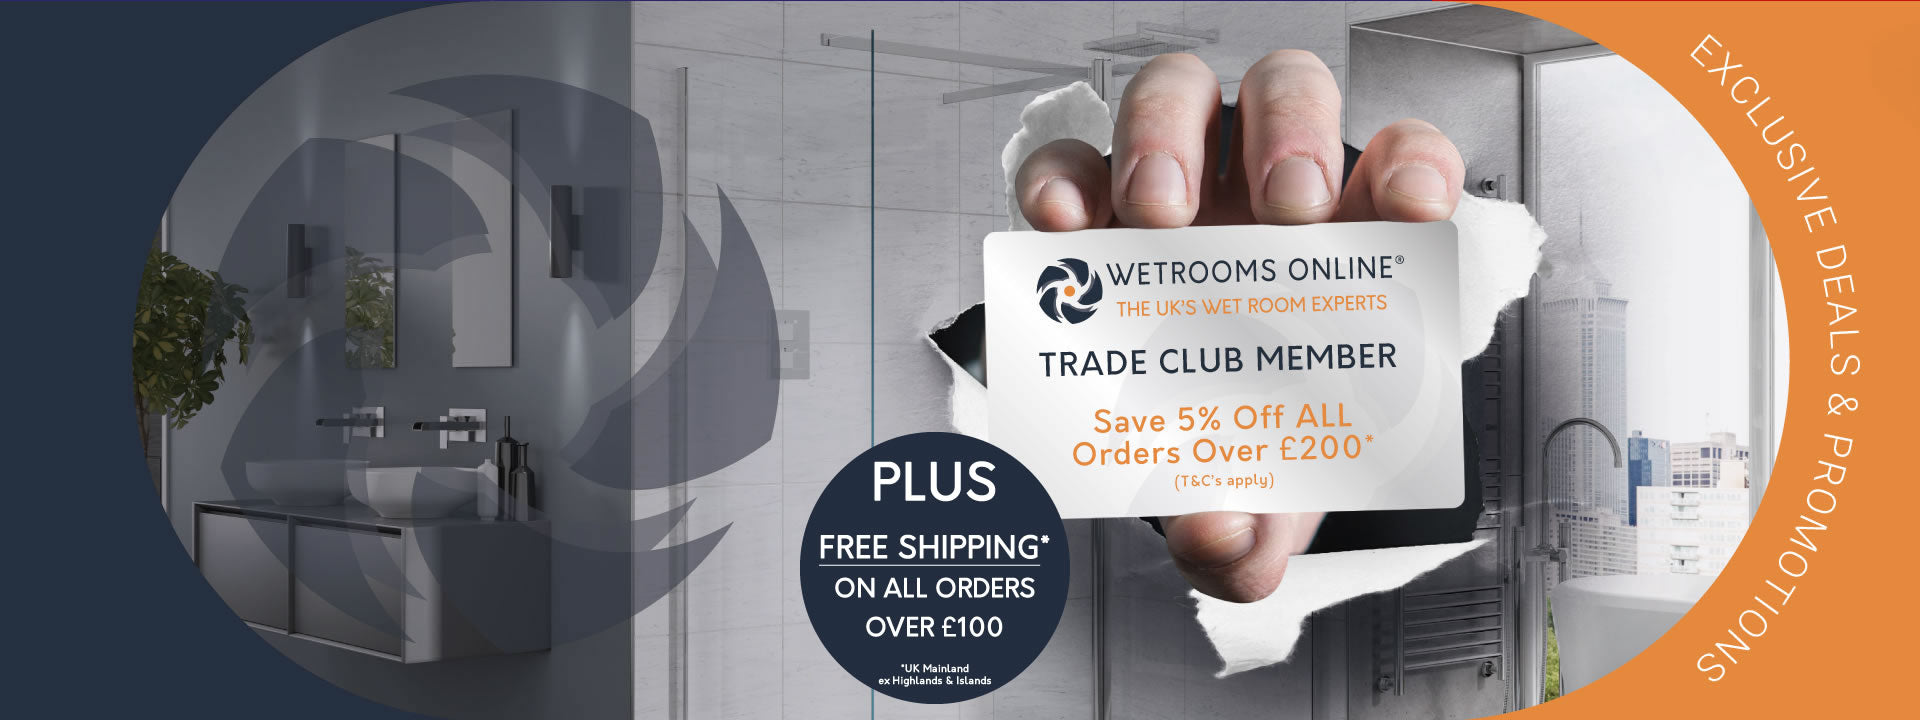 Join the Wetrooms Online Trade Club & Save